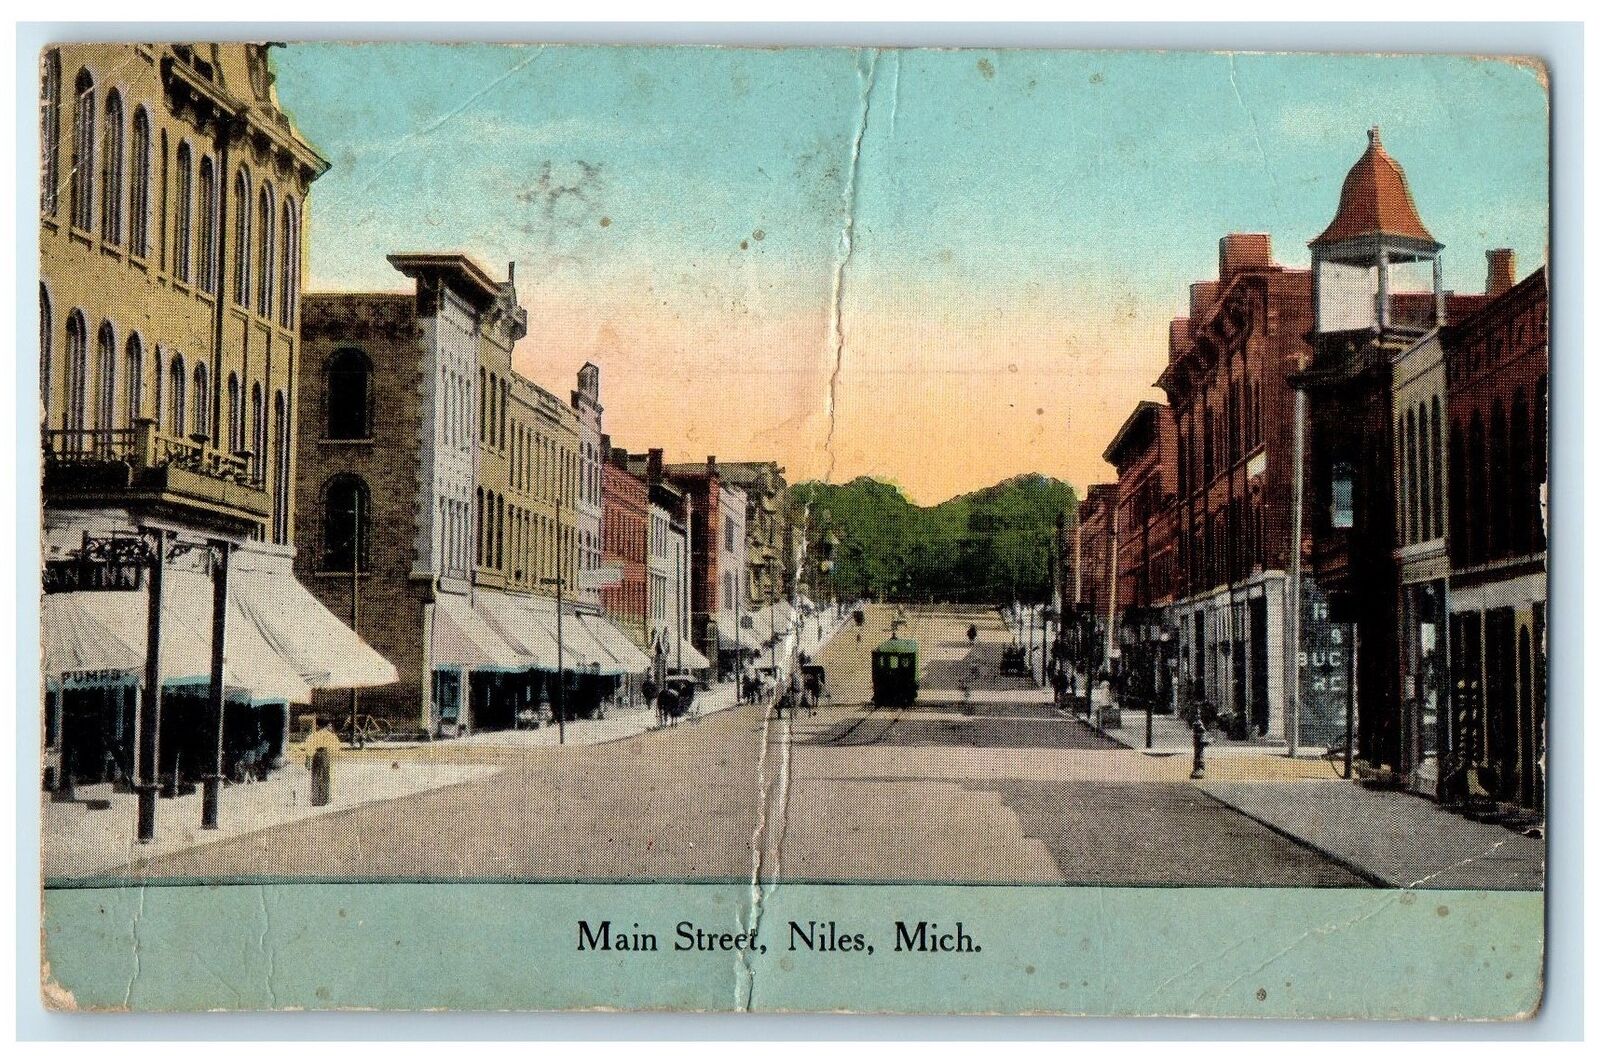 1940 Main Street Carriages Shops Scene Niles Michigan MI Posted Vintage Postcard